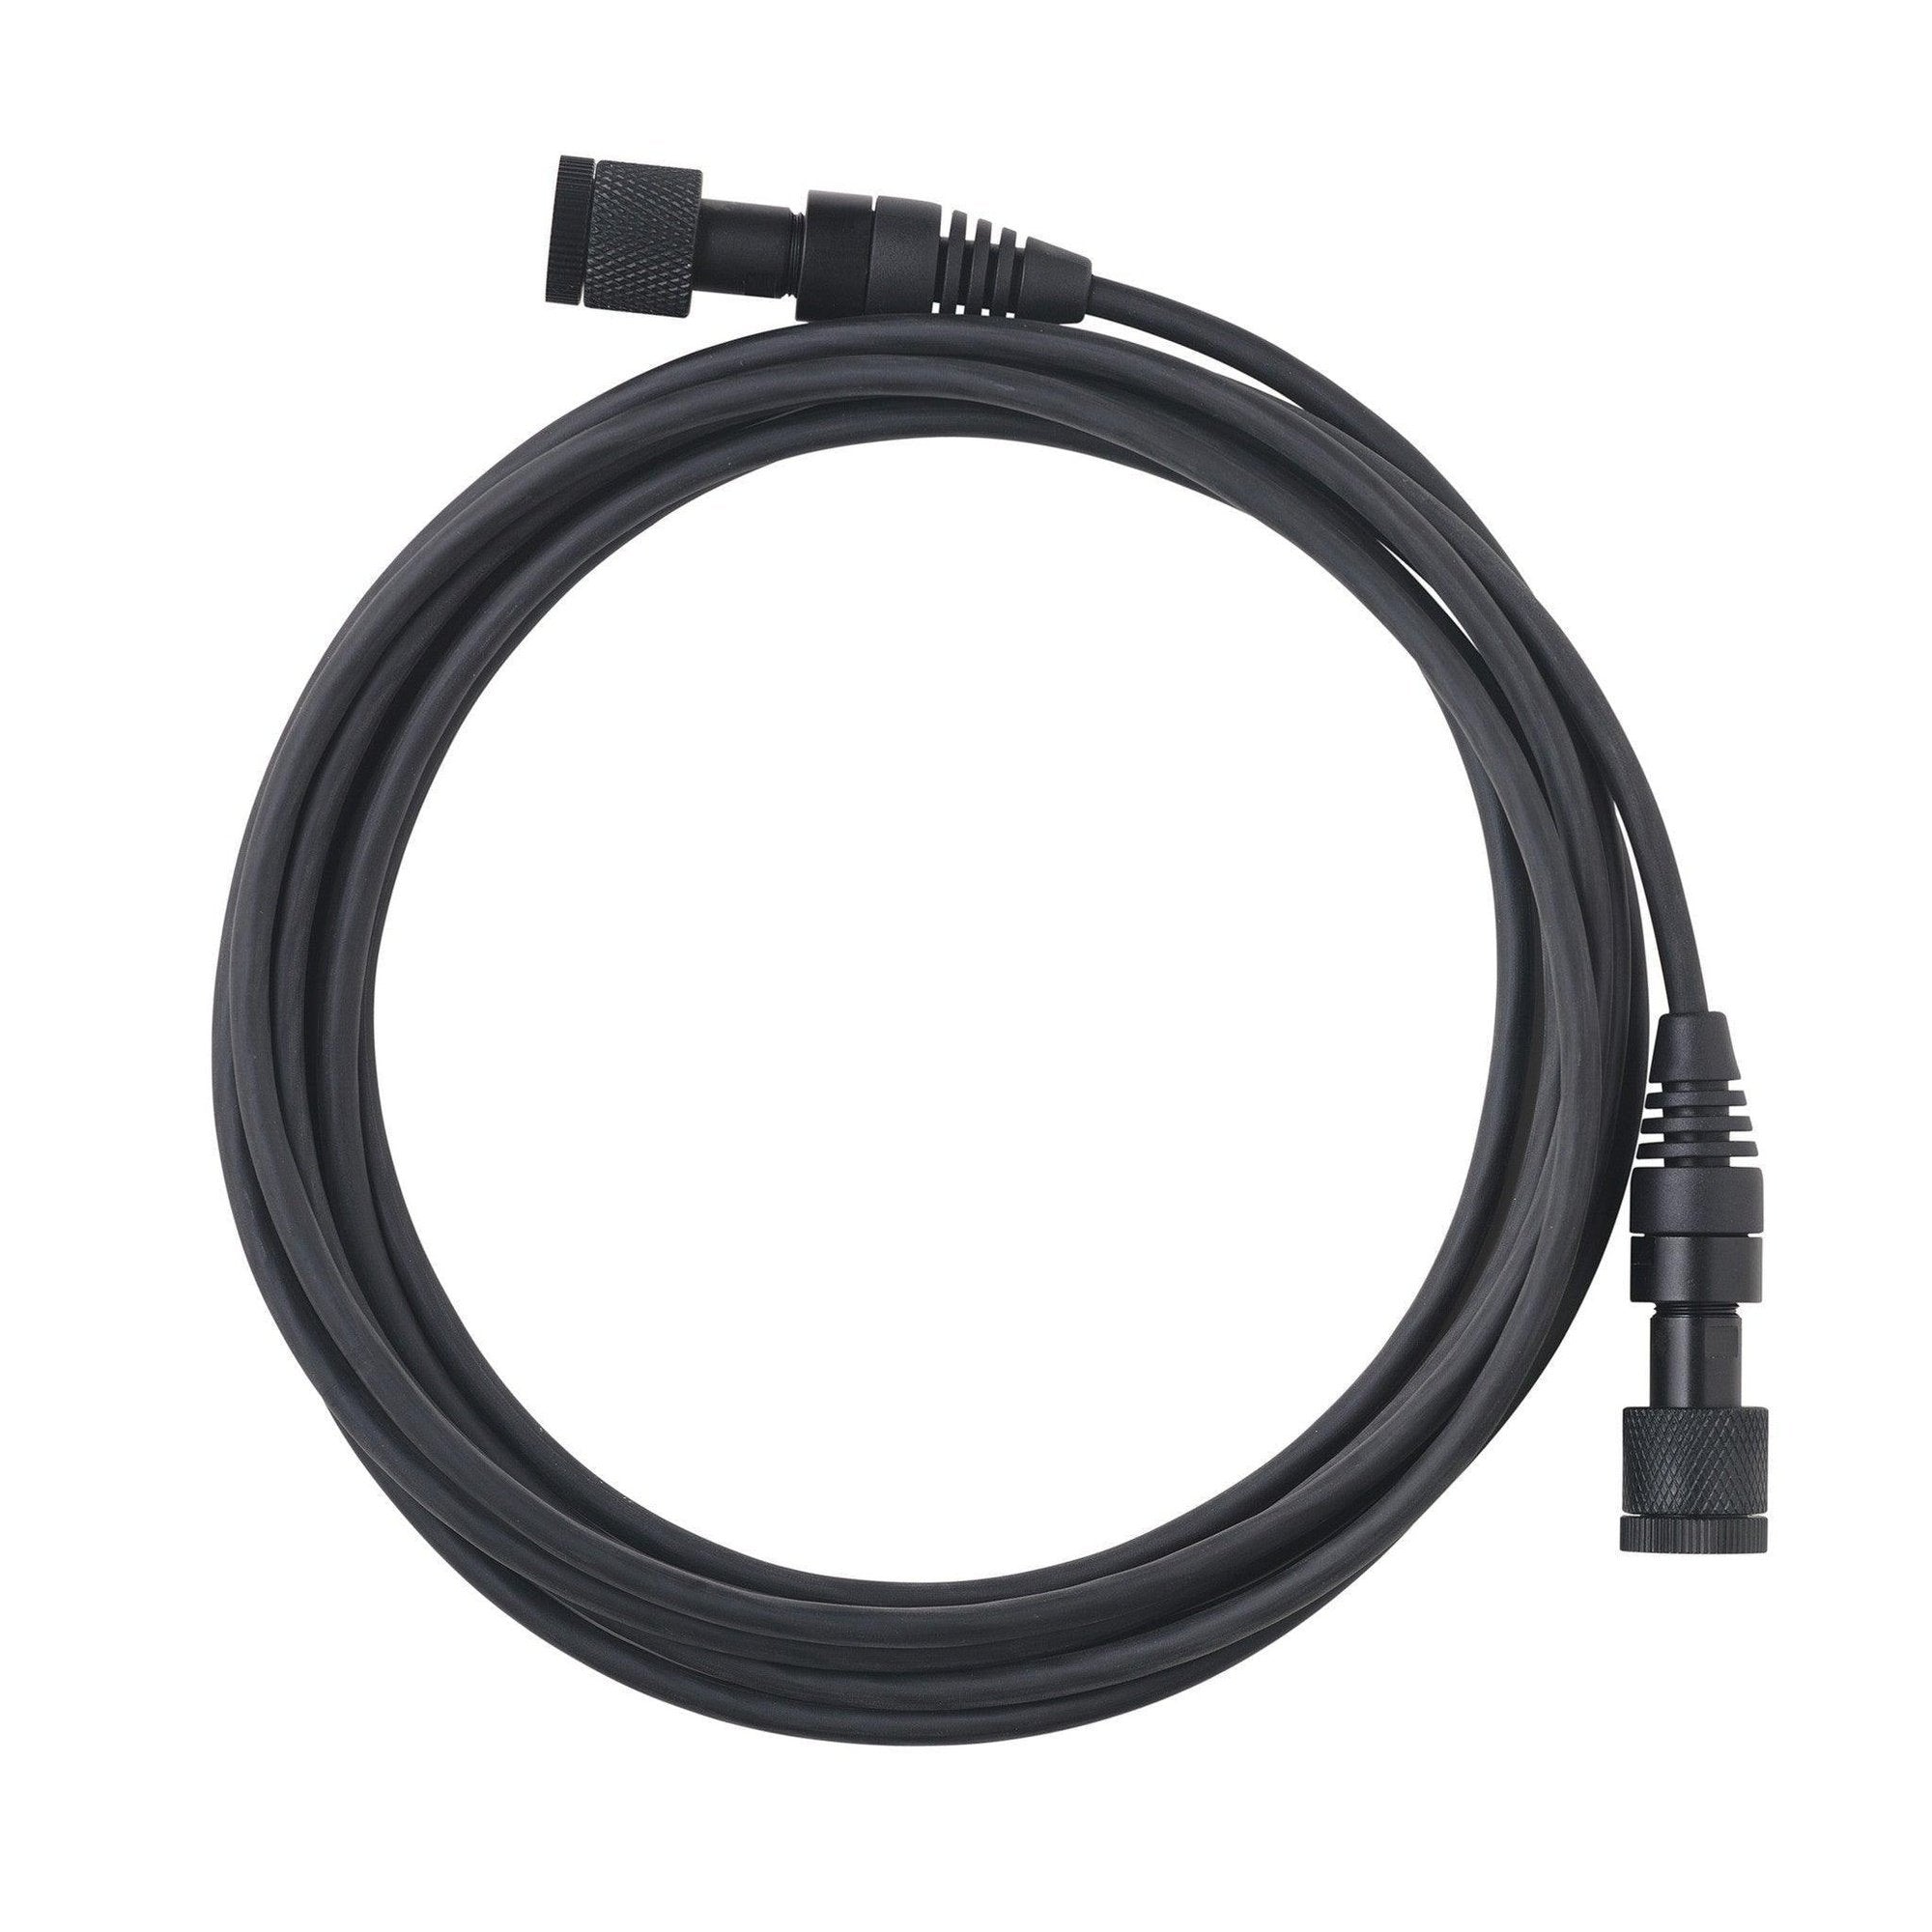 waterproof flash extension cable